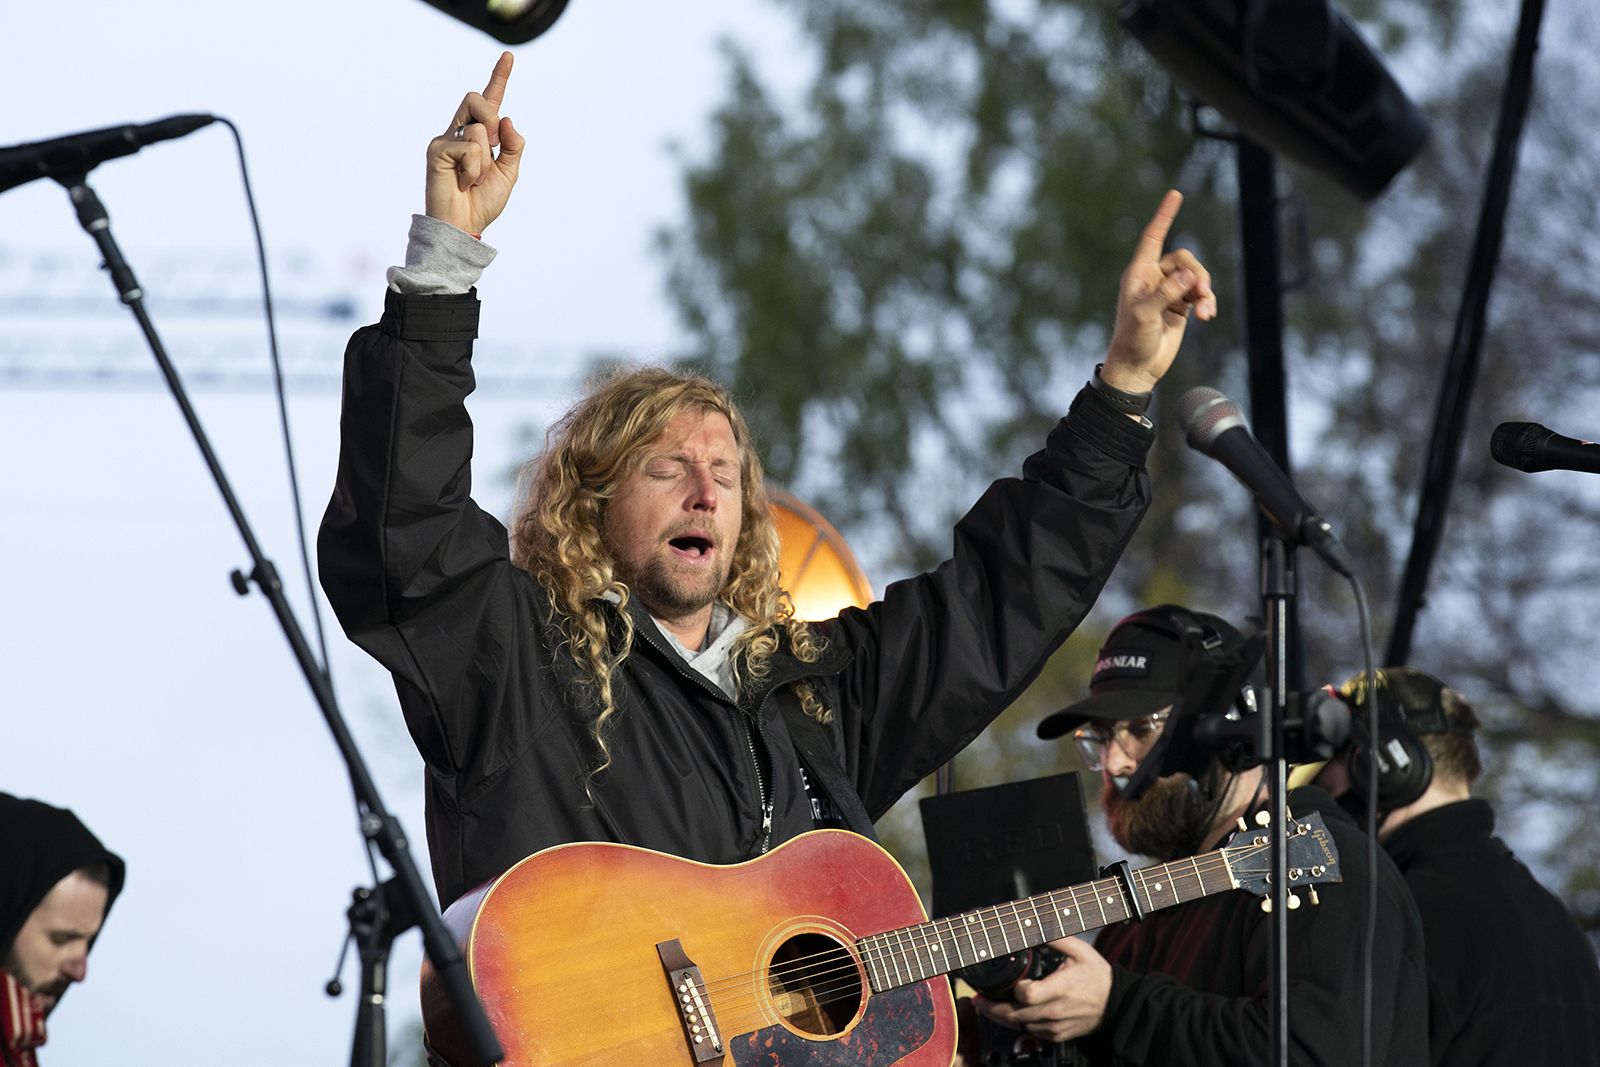 Christian musician Sean Feucht, of California, sings to the crowd during a "Let Us Worship" tour concert and rally at the National Mall in Washington, Sunday, Oct. 25, 2020. (AP Photo/Jose Luis Magana)